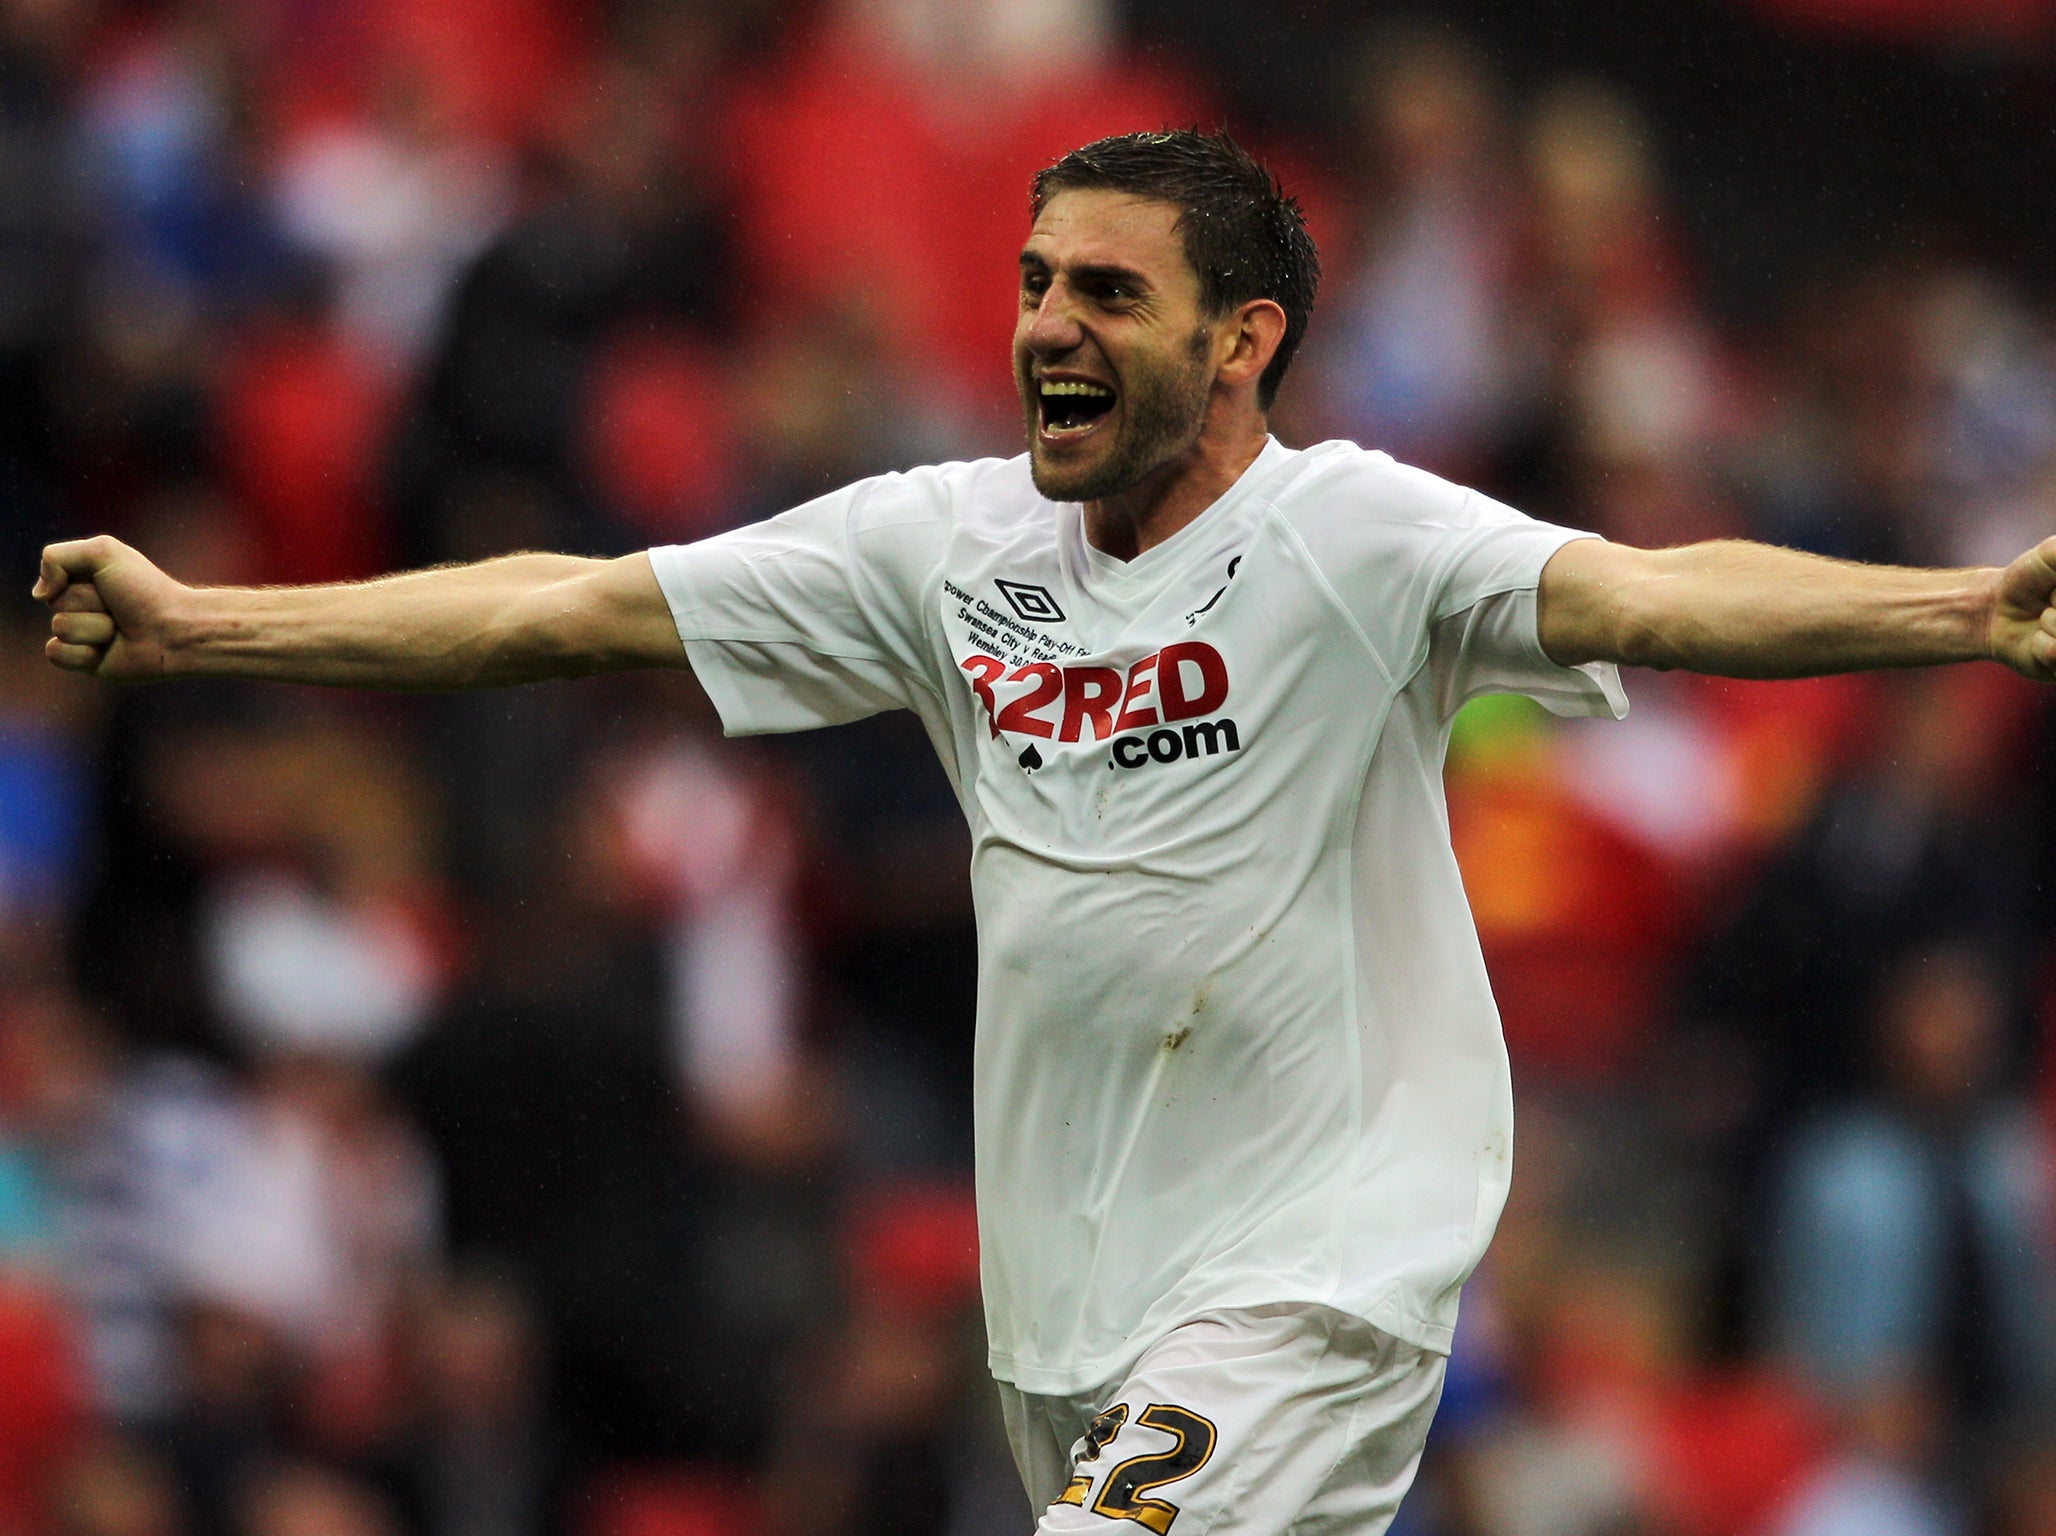 The play-off final remains the happiest day of Rangel's career